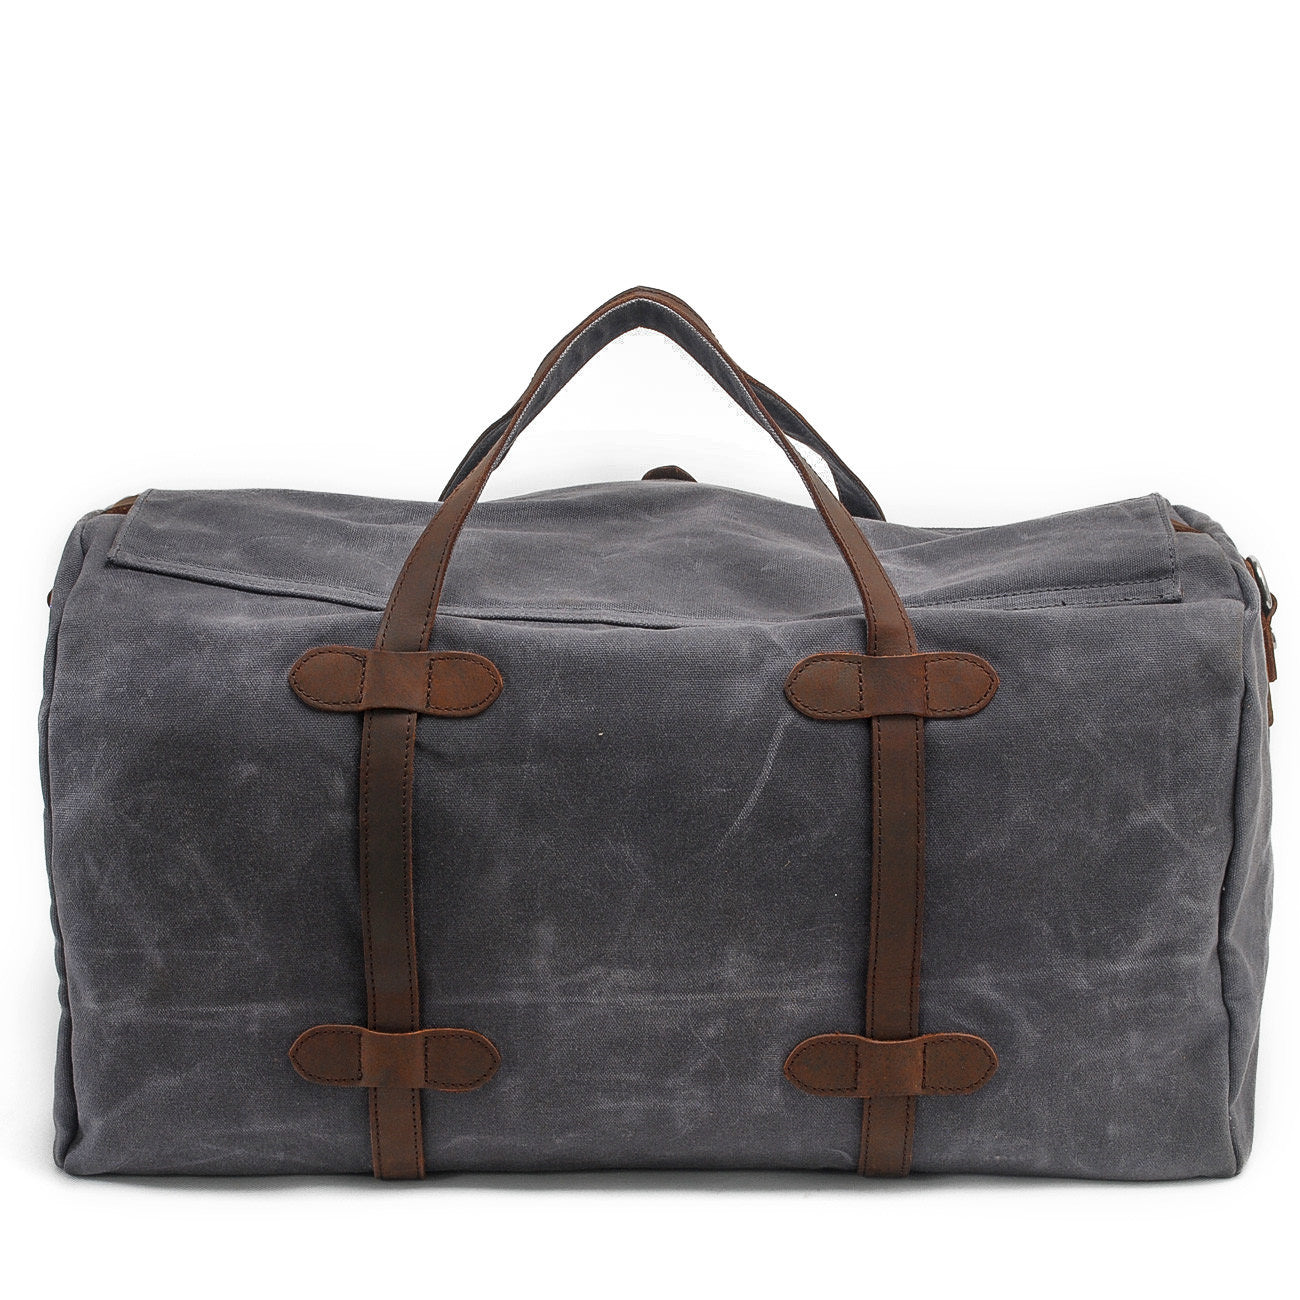 oversized duffle bag for gym